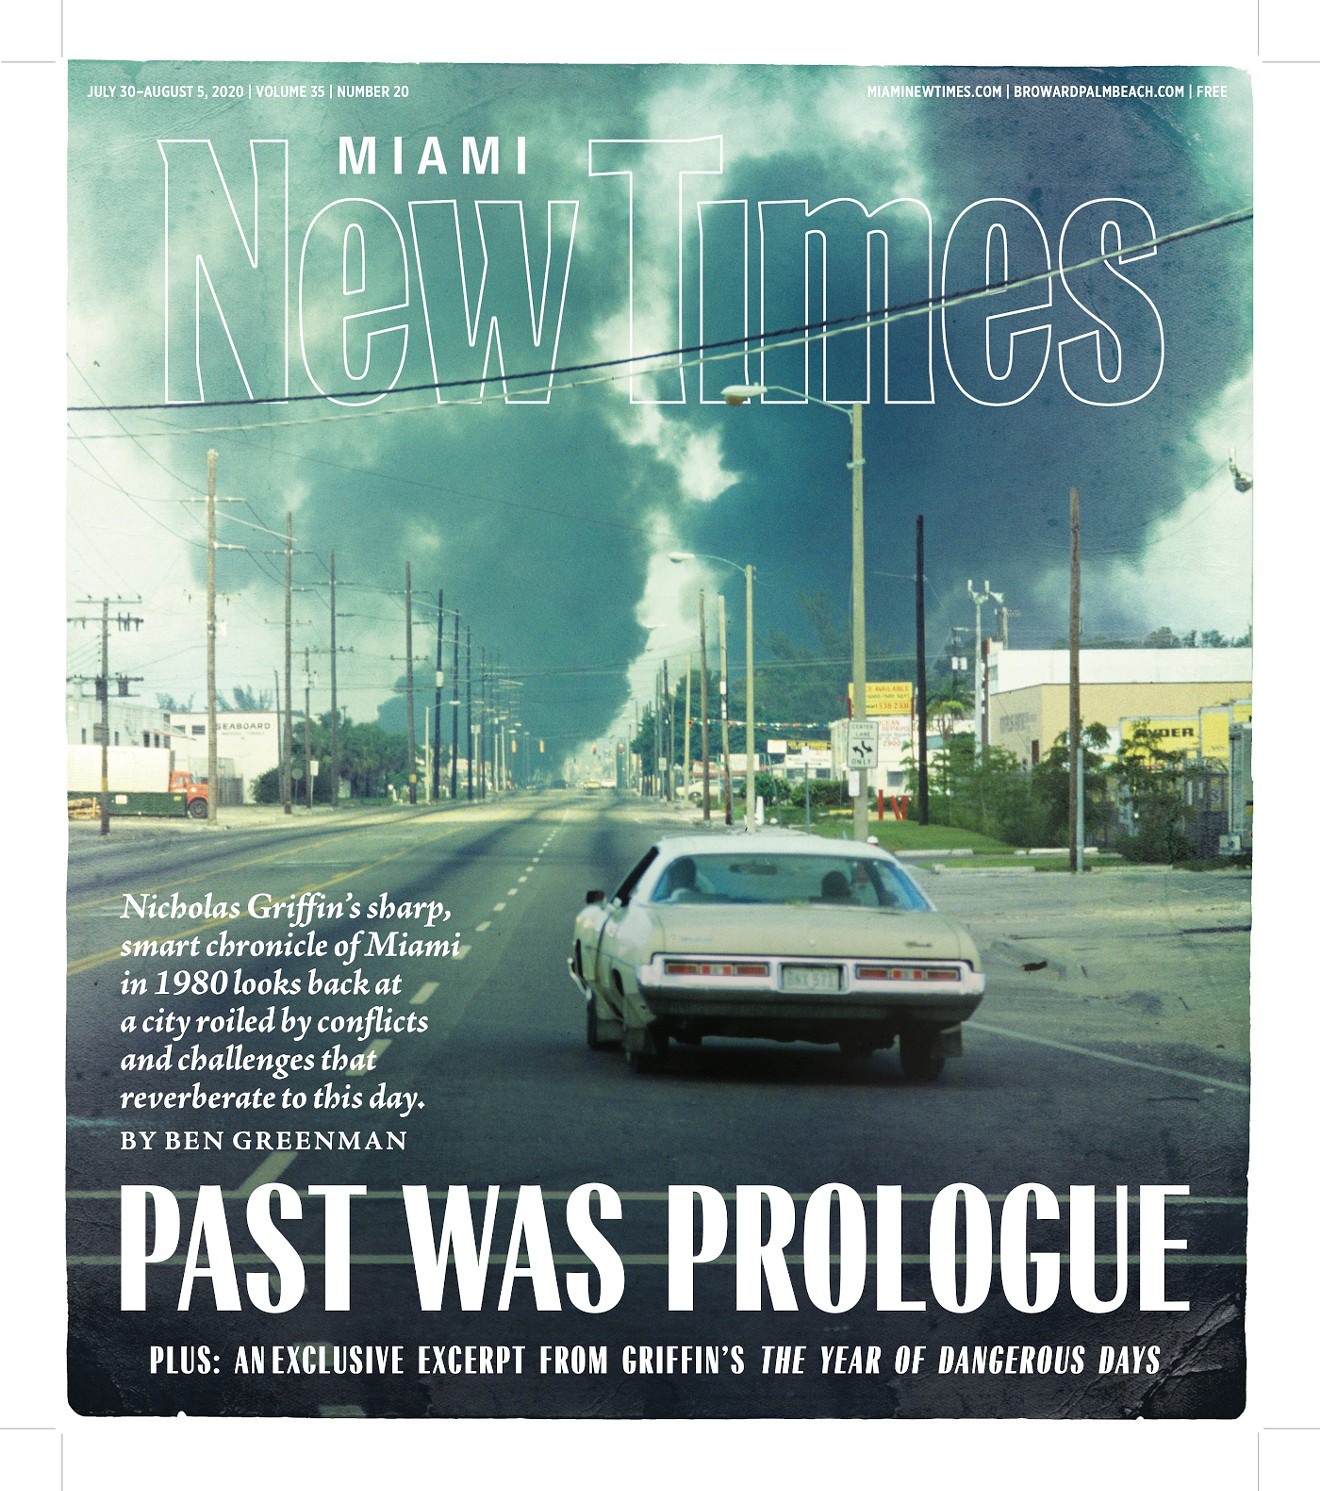 An archival photo of the McDuffie riots from the Miami News Collection at HistoryMiami Museum